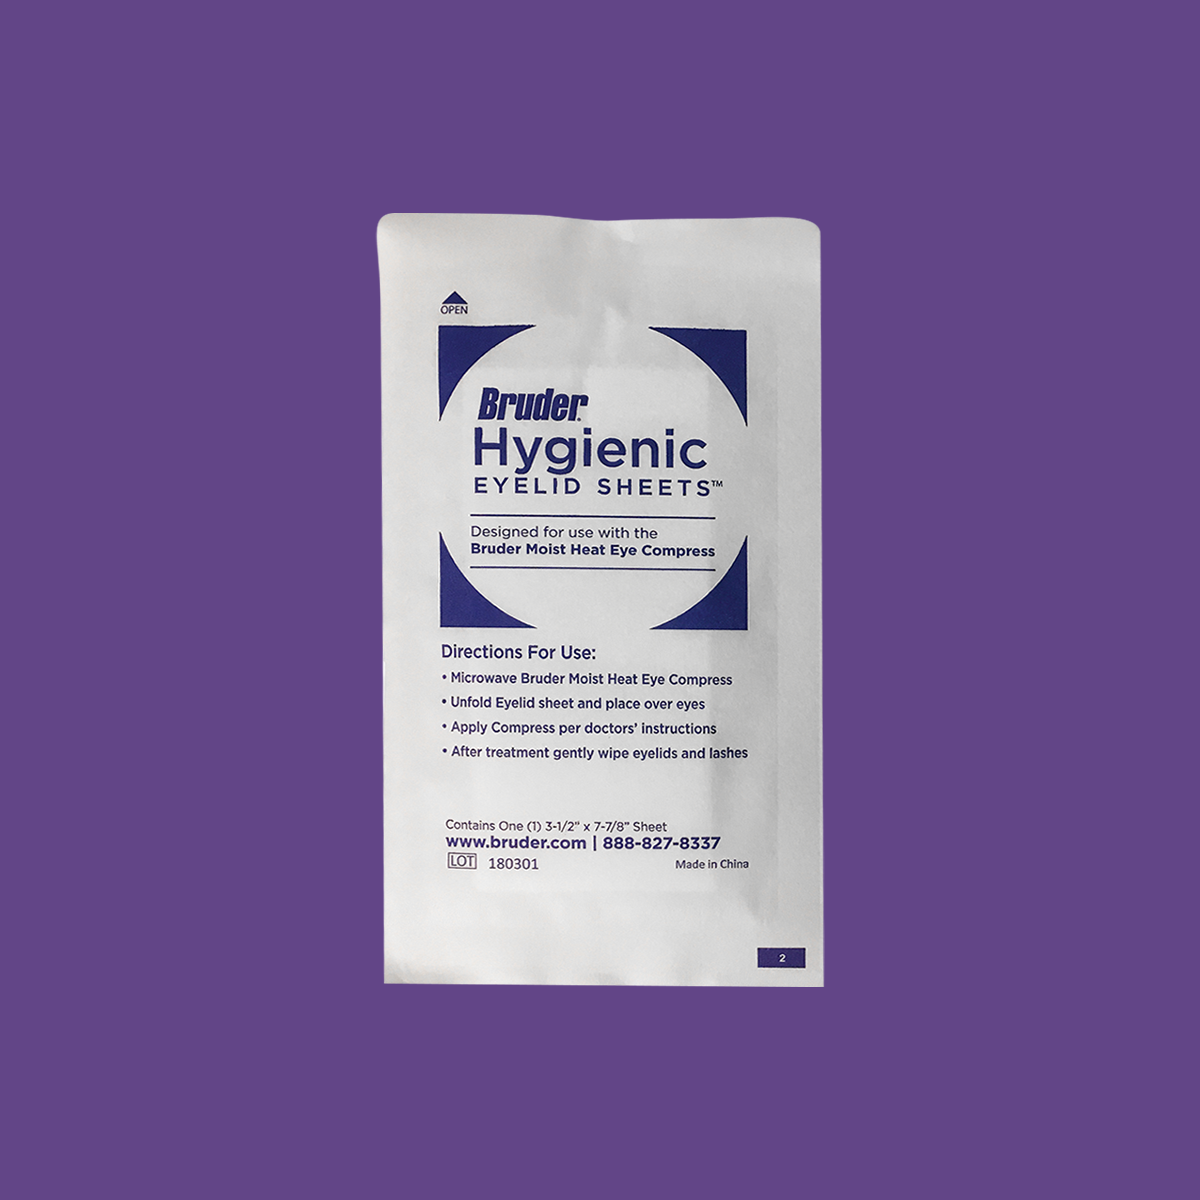 Bruder Hygienic Eyelid Sheets 35 Count Box (Used with Bruder Mask)